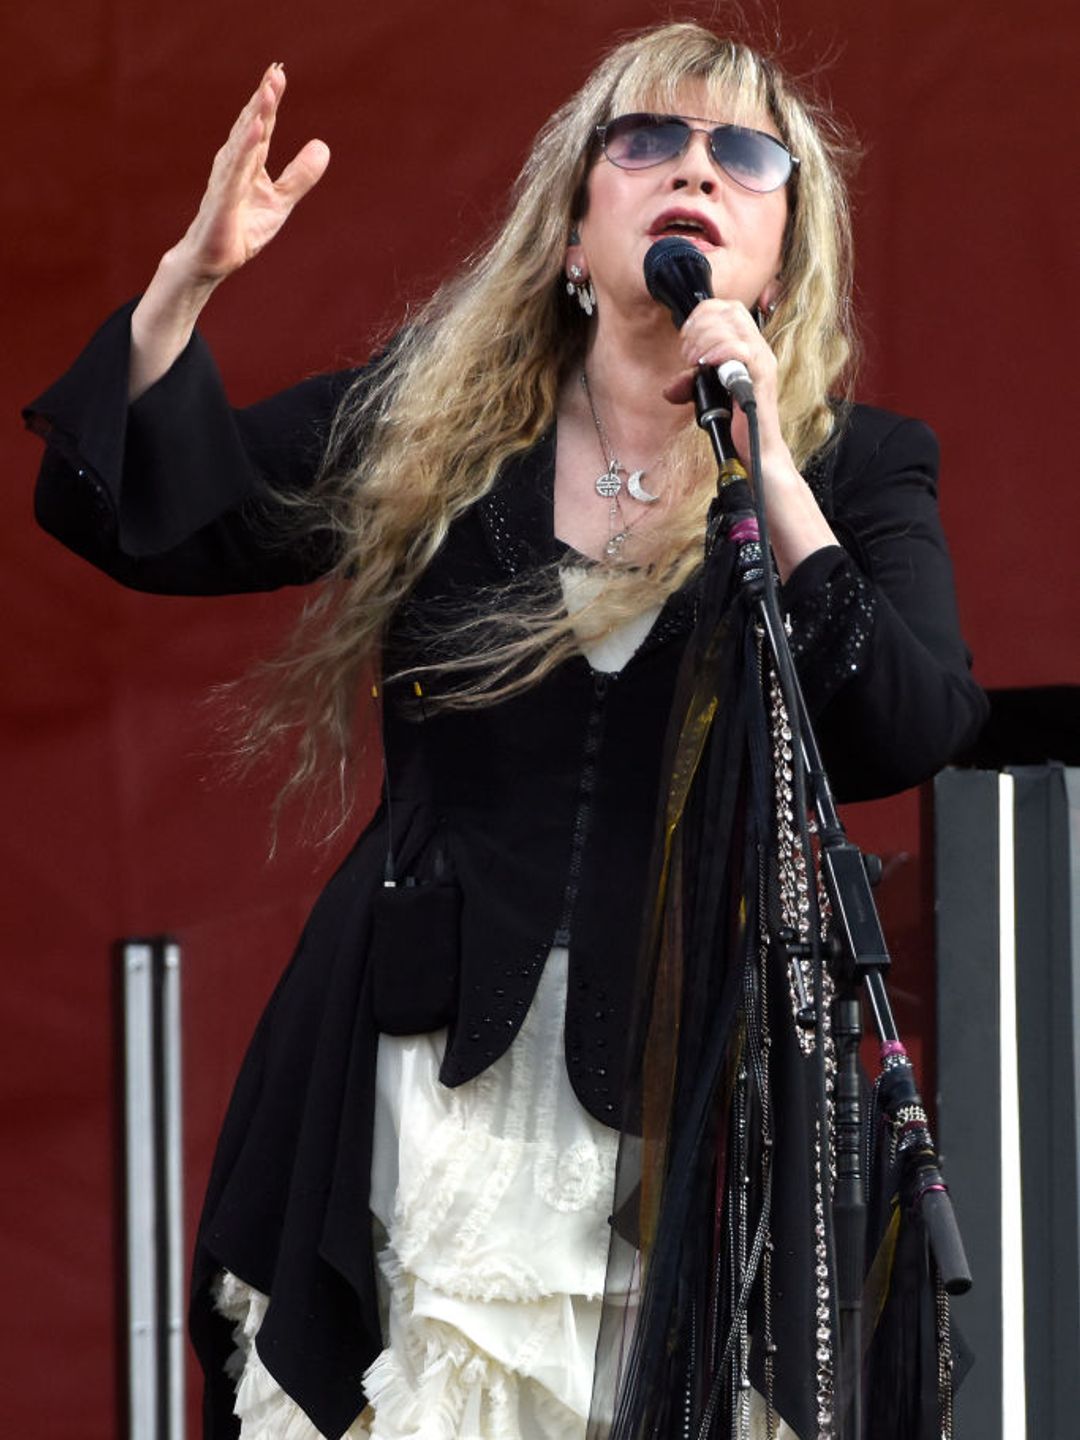 Stevie Nicks performs during the 2022 New Orleans Jazz and Heritage Festival at Fair Grounds Race Course on May 07, 2022 in New Orleans